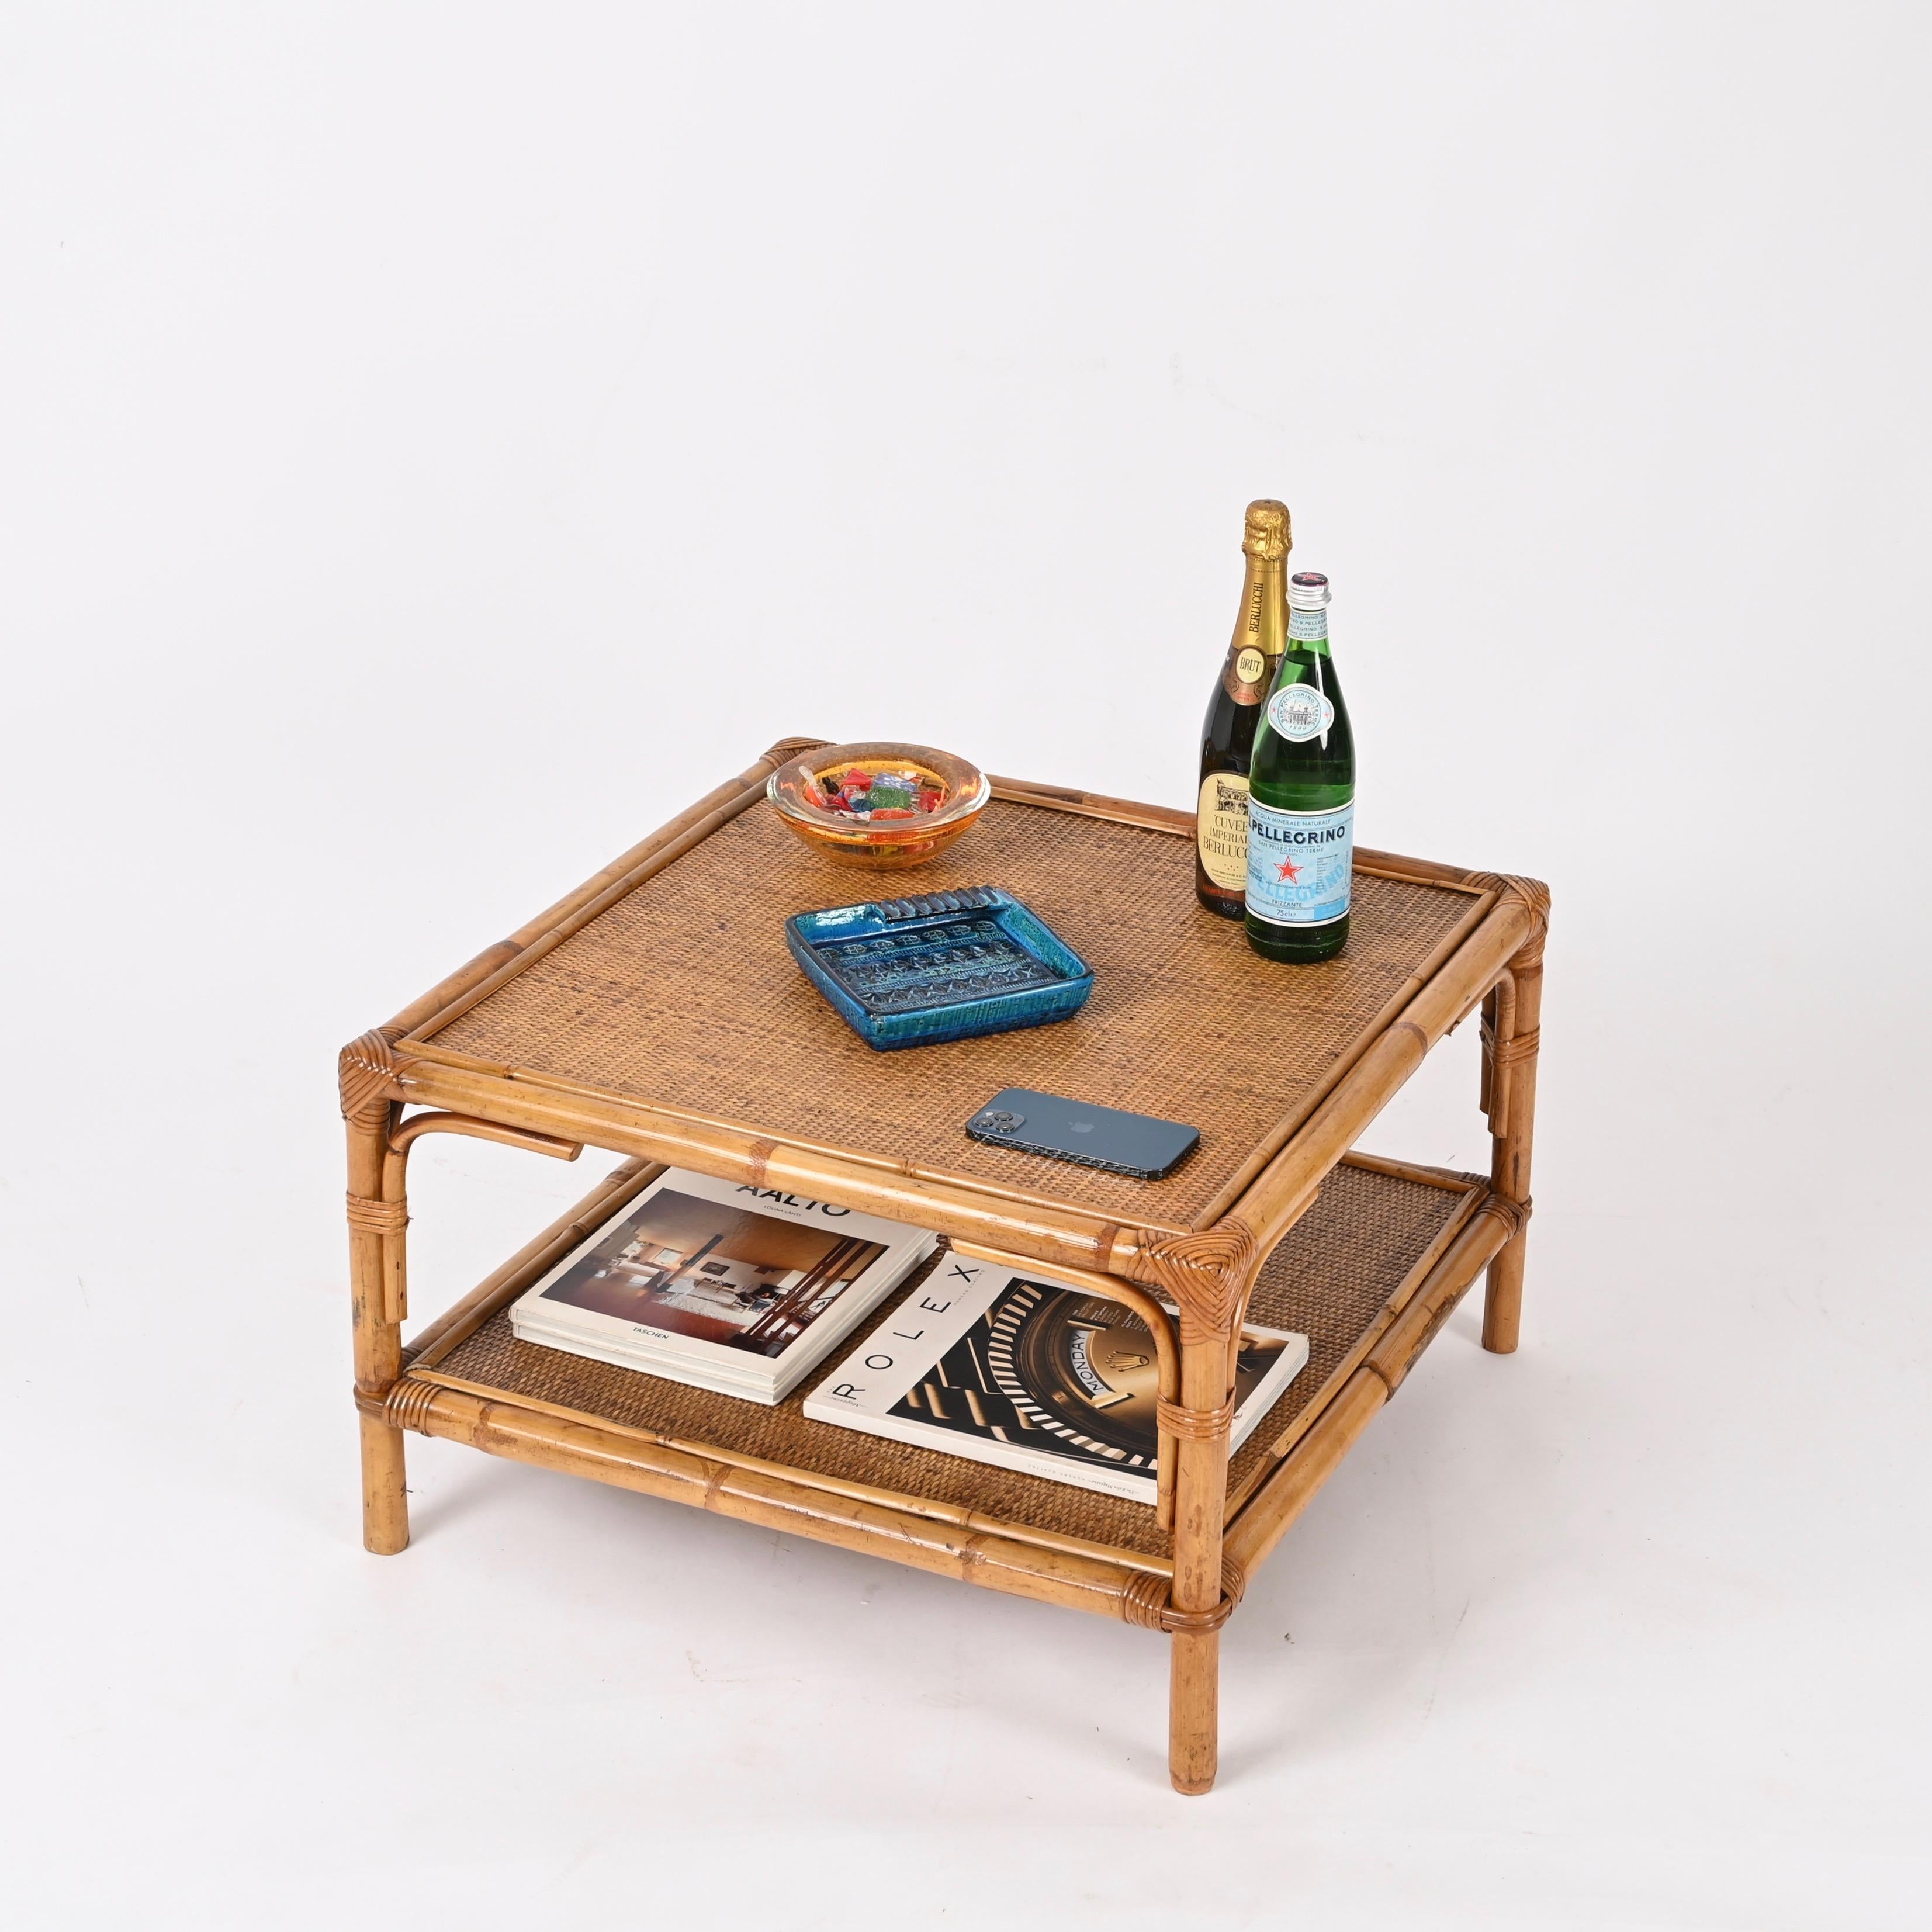 Gorgeous Mid-Century two-tier square coffee table fully made in bamboo, rattan and wicker. This lovely organic cocktail table was designed by Vivai del Sud in Italy in the 1970s.

This table was fully hand-crafted with perfect proportions, it